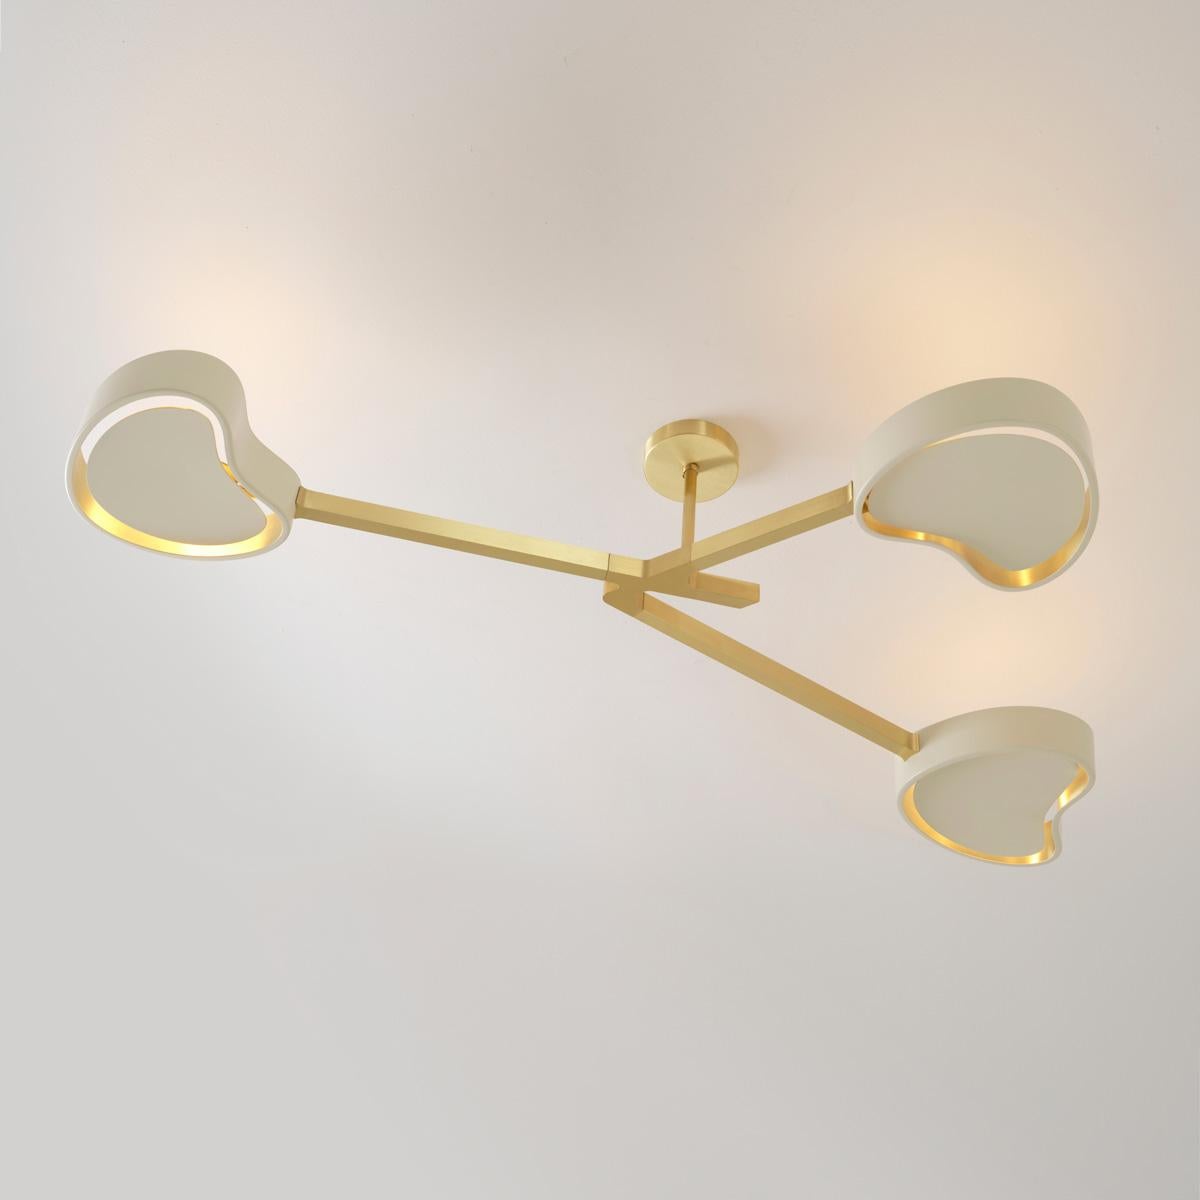 Cuore N.3 Ceiling Light by Gaspare Asaro. Peltro and Bronze Finish In New Condition For Sale In New York, NY